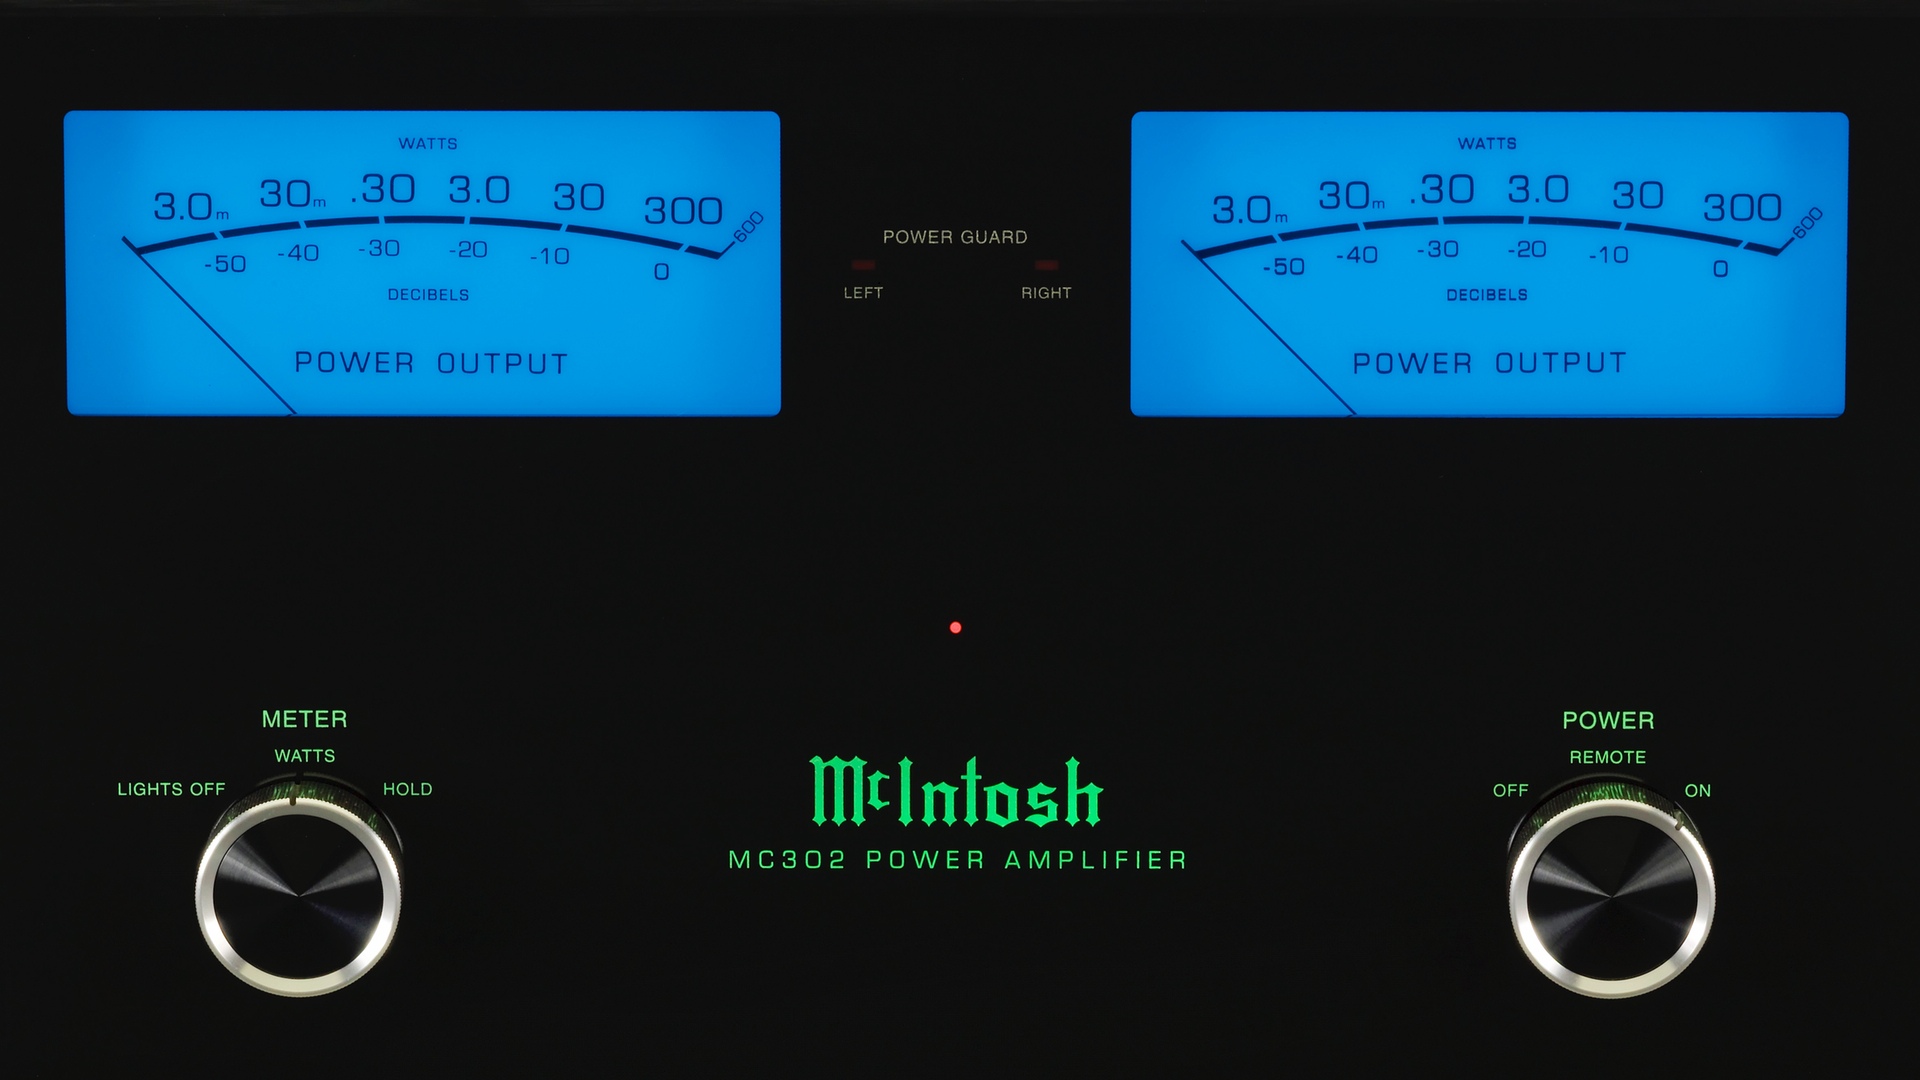 Behind The Blue Making Of Mcintosh S Iconic Amplifiers